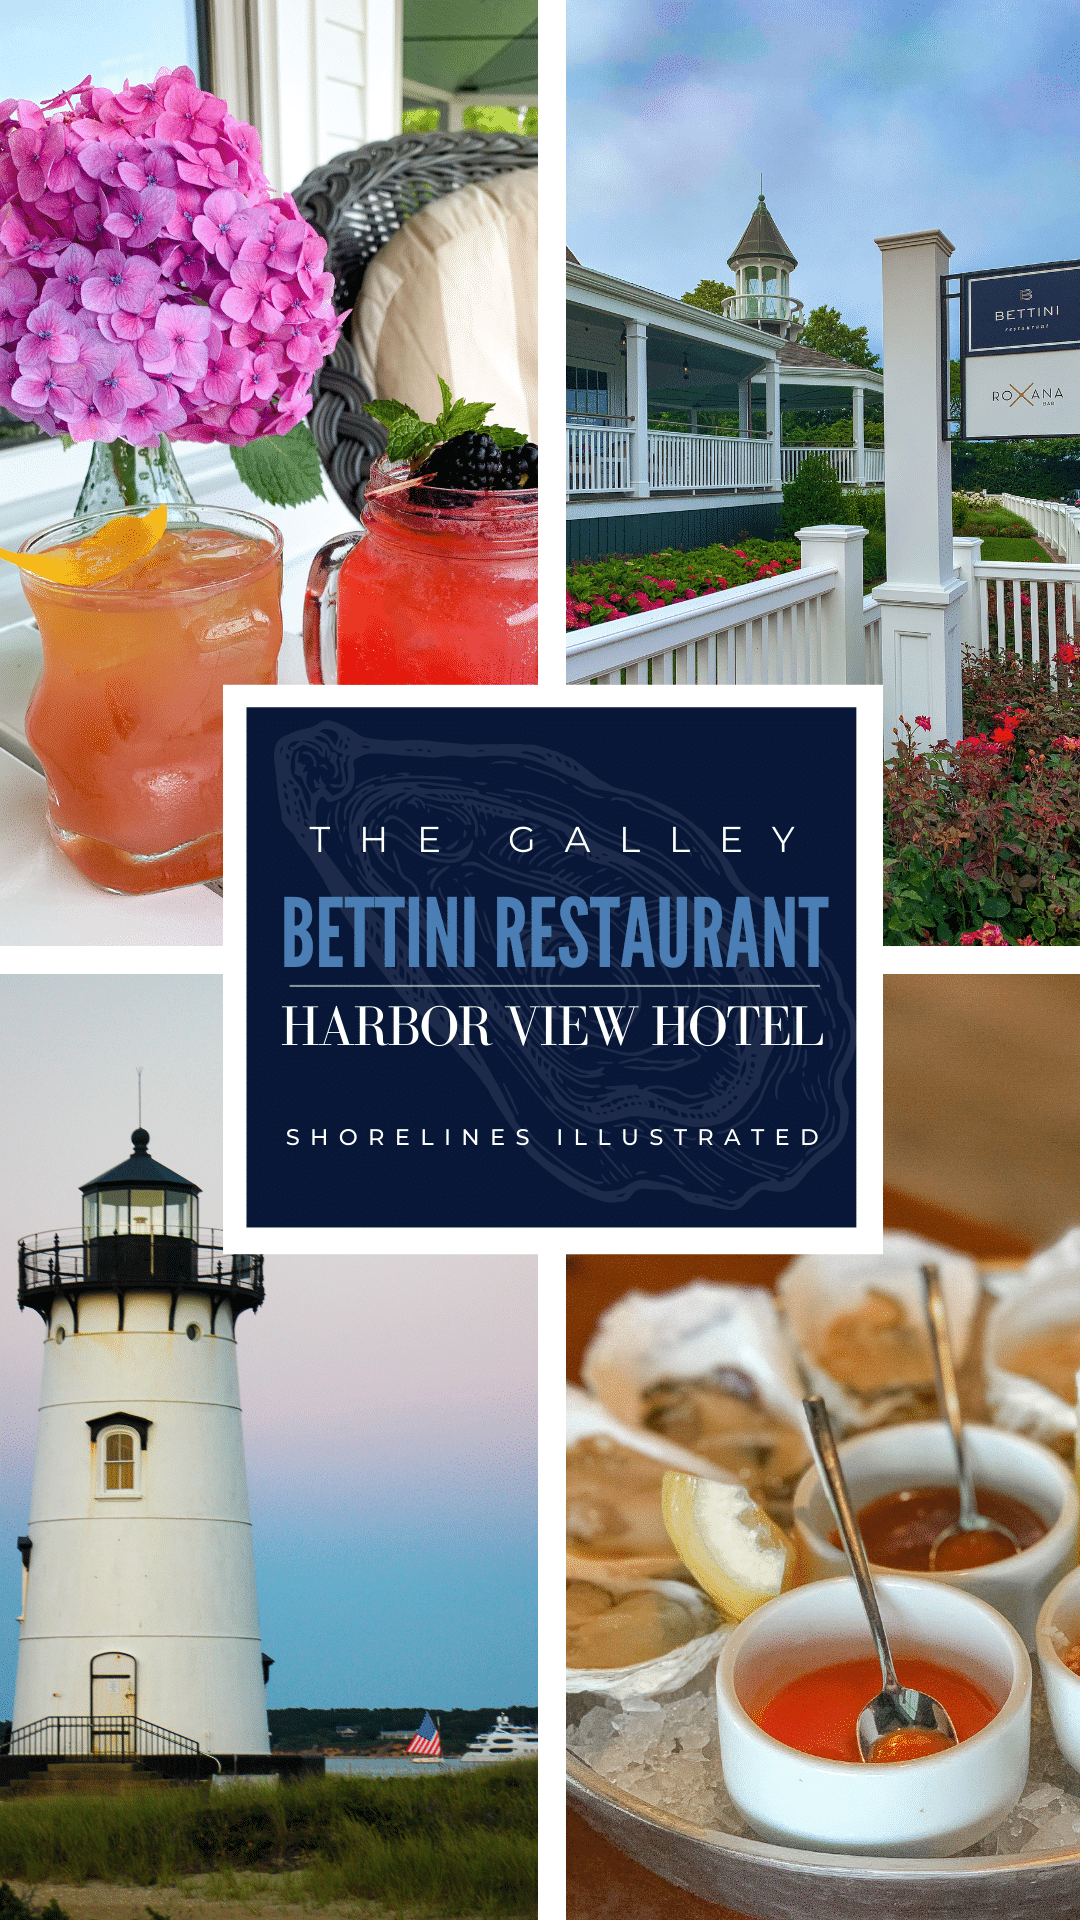 Celebrating a very special occasion at Bettini Restaurant at the Harbor View Hotel in Edgartown Marthas Vineyard